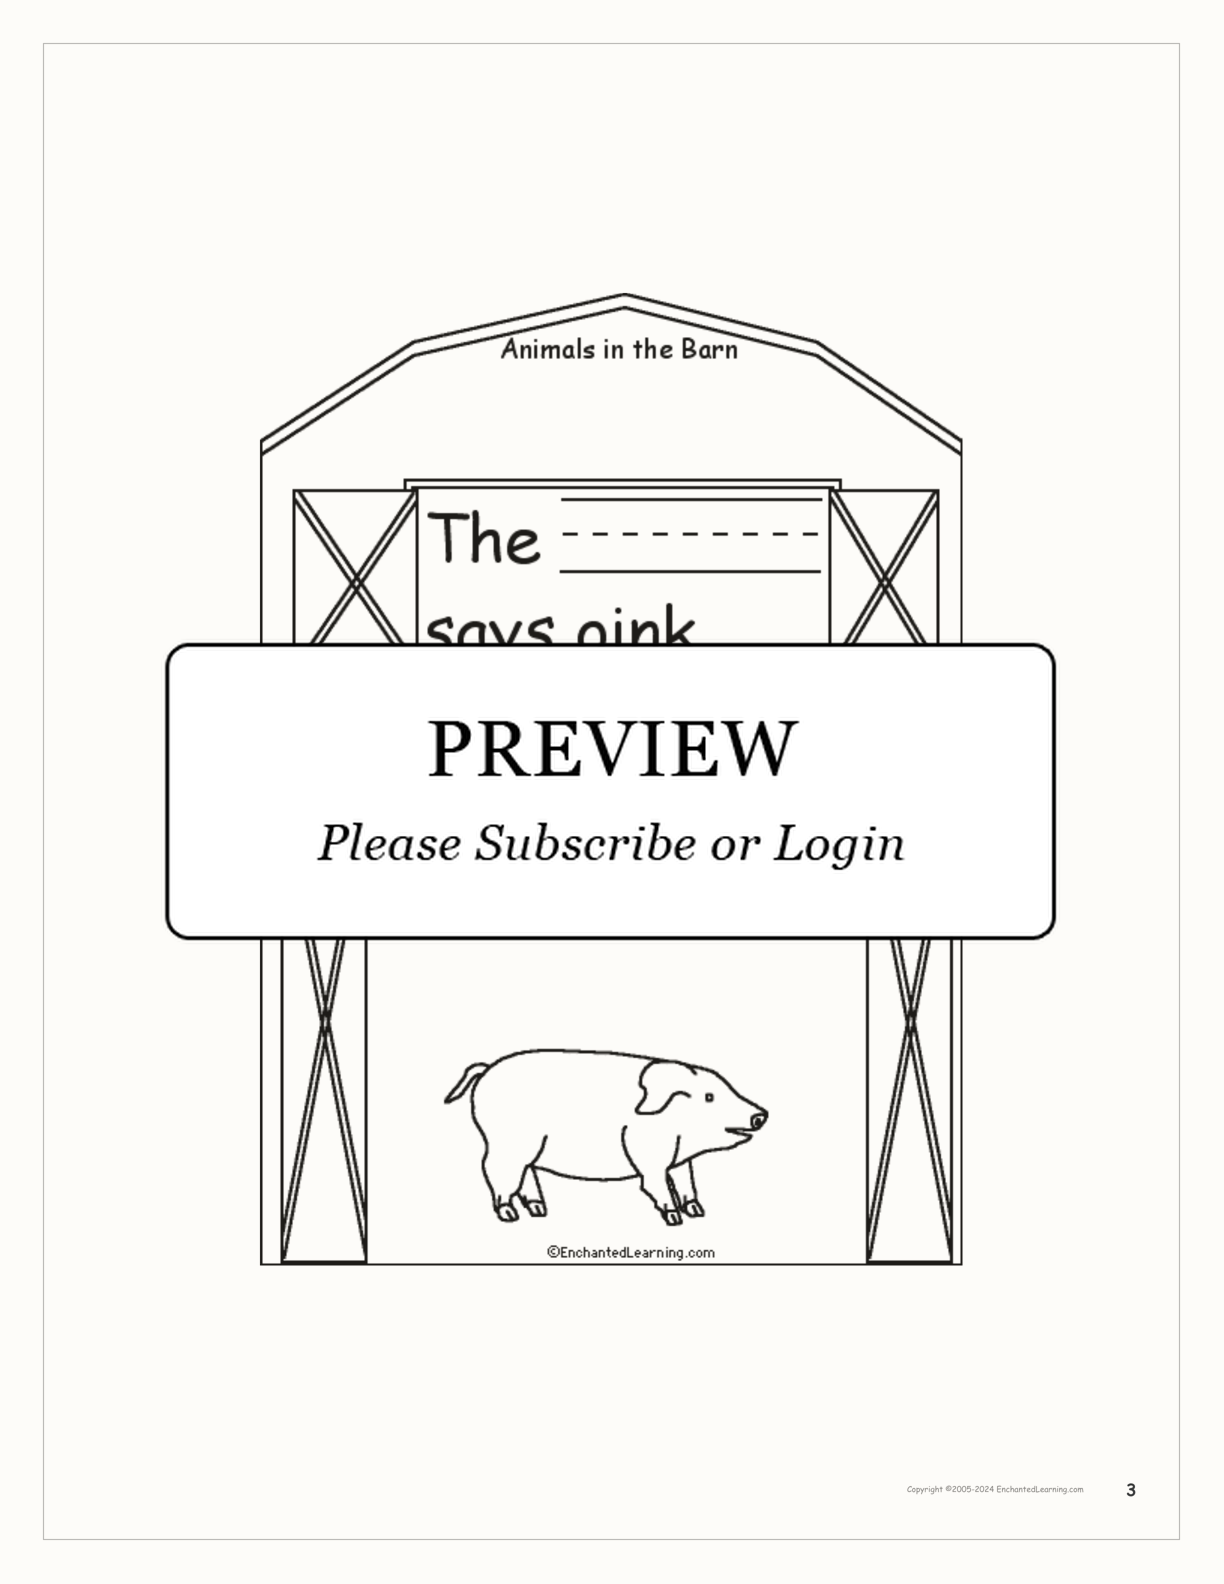 Animals in the Barn Book interactive printout page 3